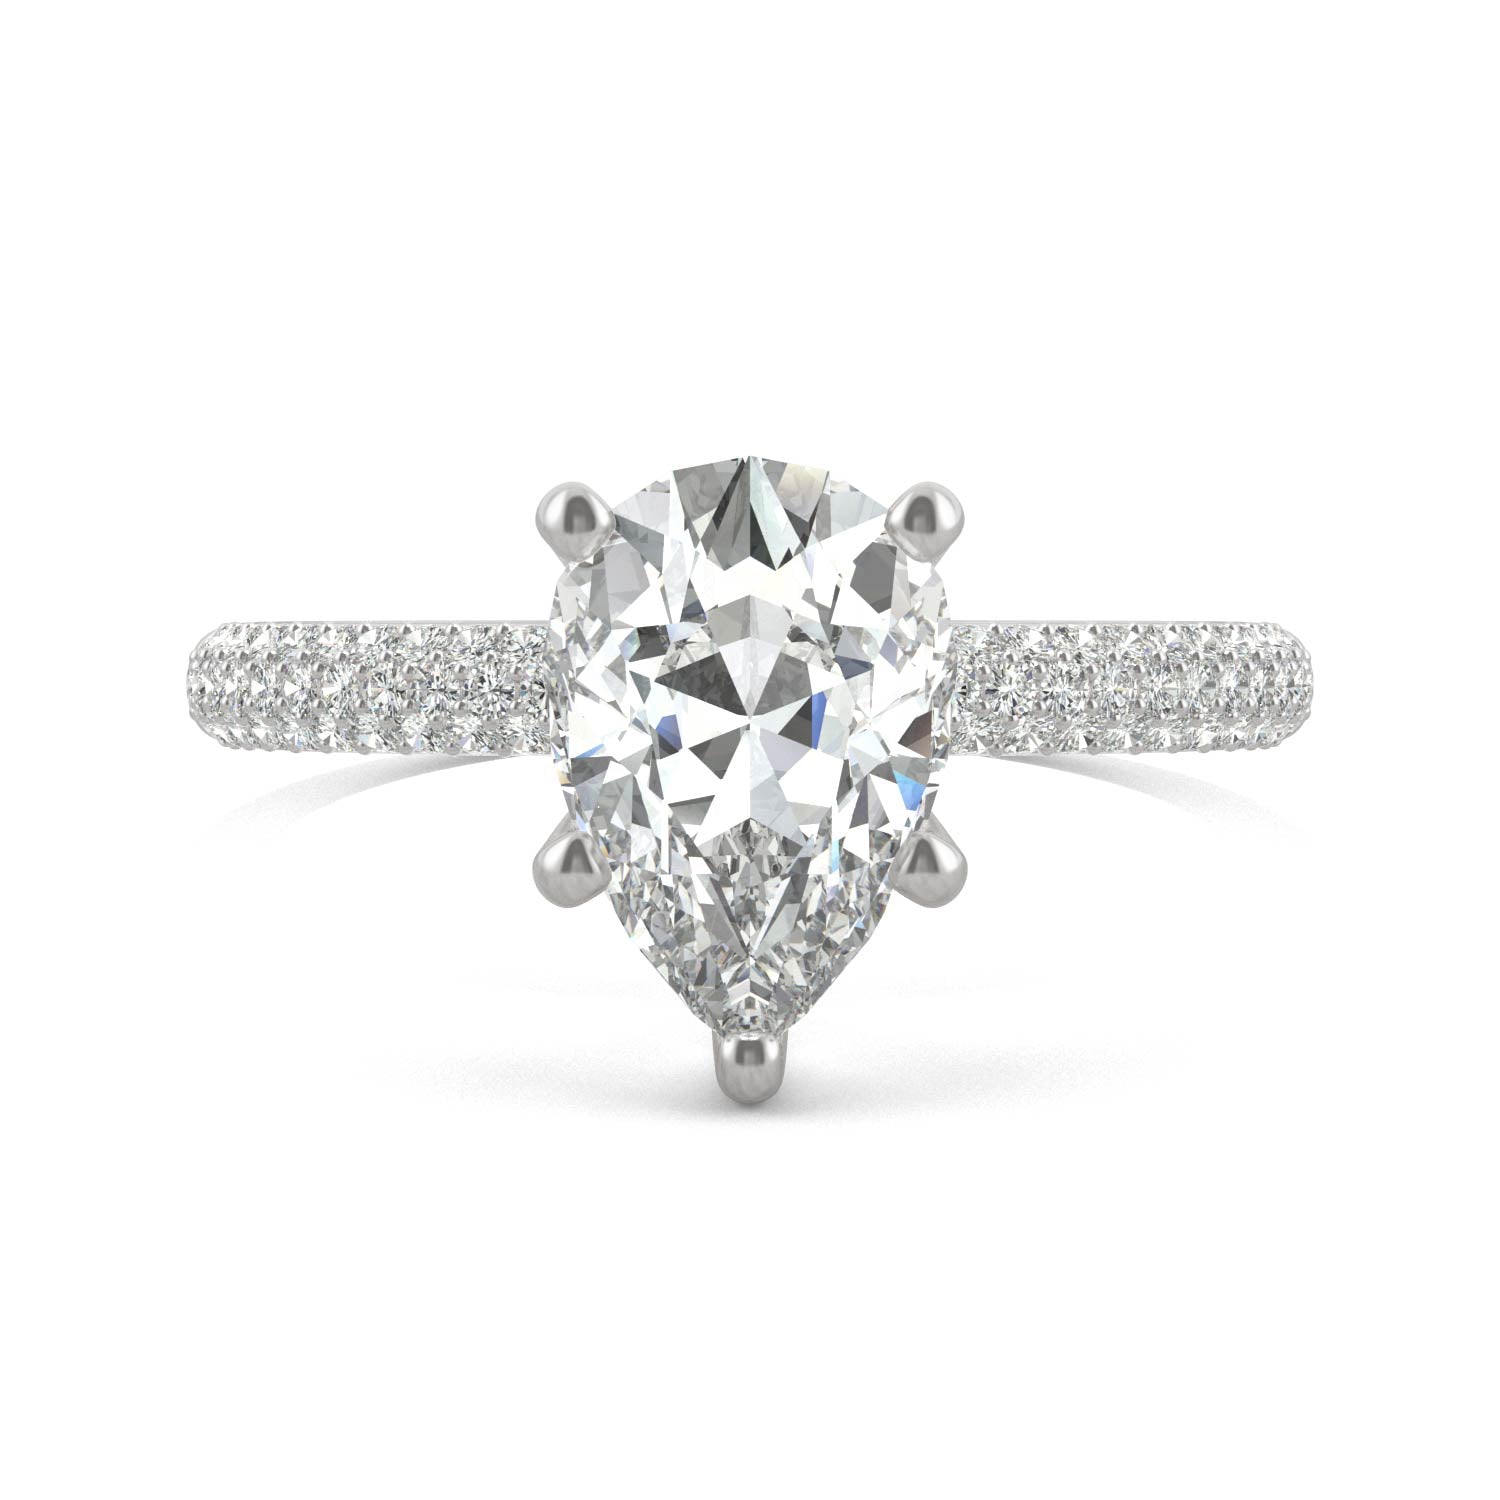 2.31 CTW DEW Pear Moissanite Pave Ring in 14K White Gold